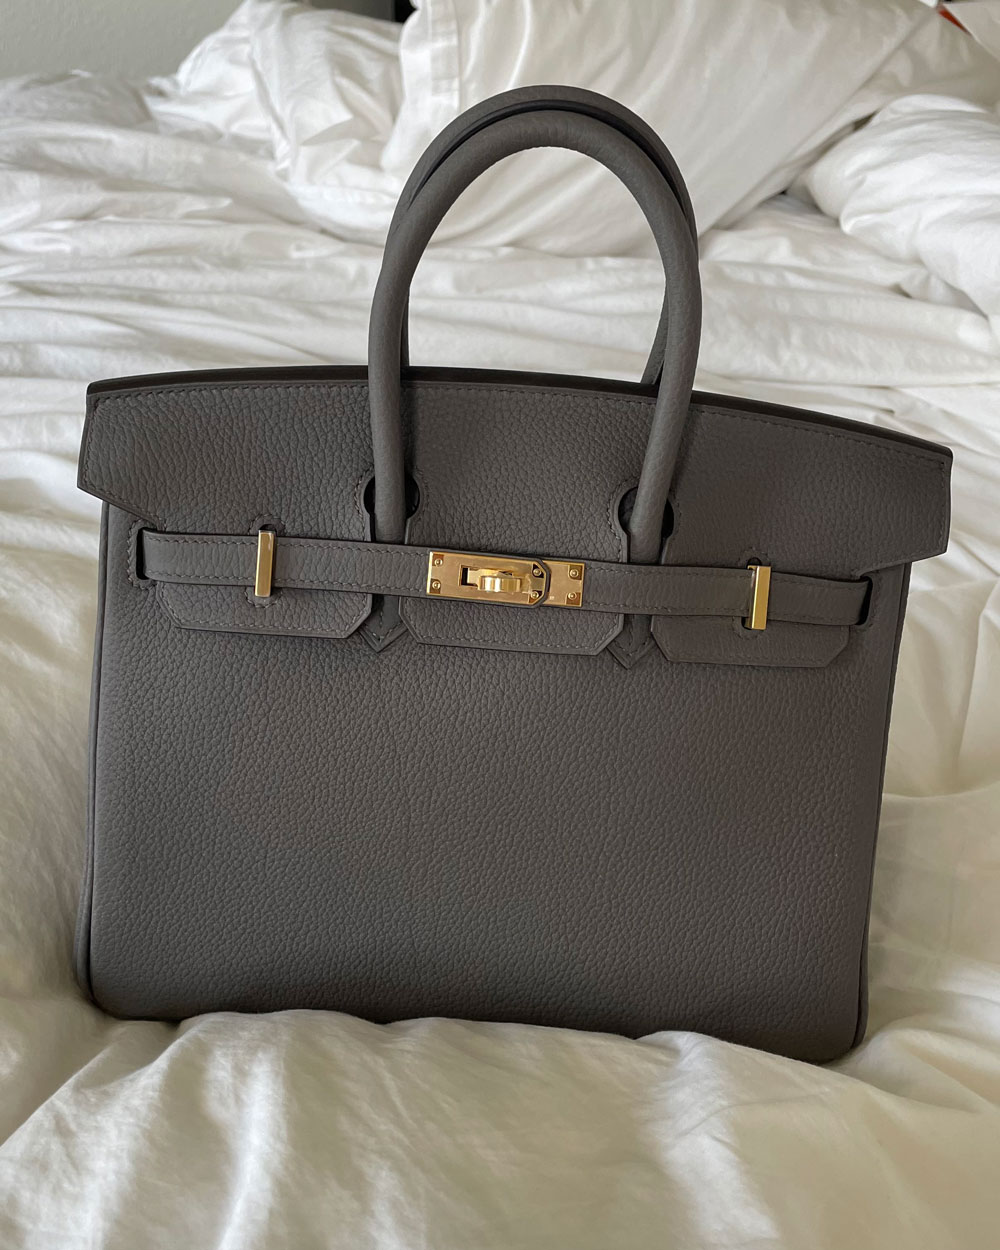 The Insanely Amazing Recent Hermès Purchases Shared on the PurseForum -  PurseBlog